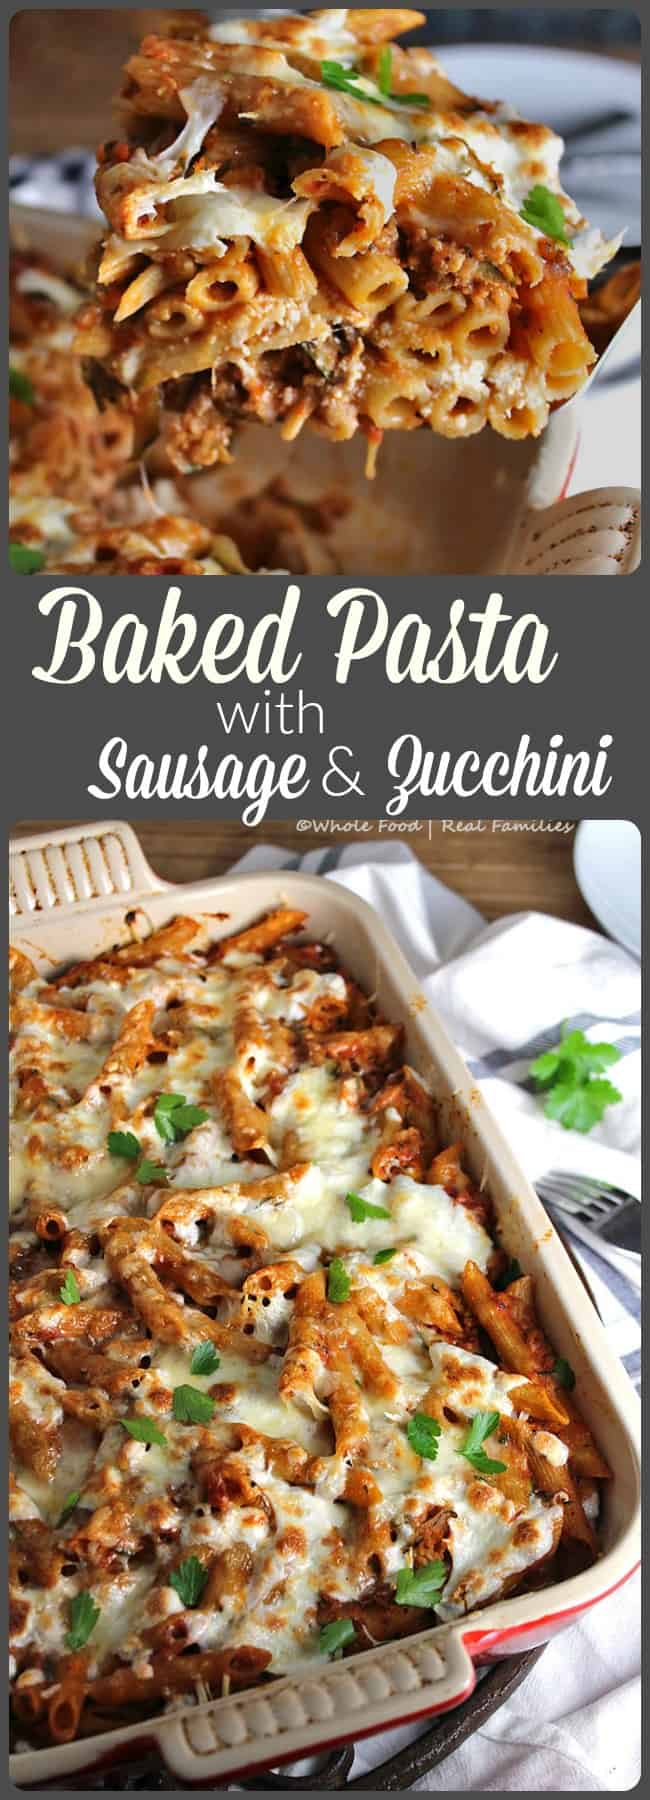 Baked Pasta with Sausage and Zucchini 